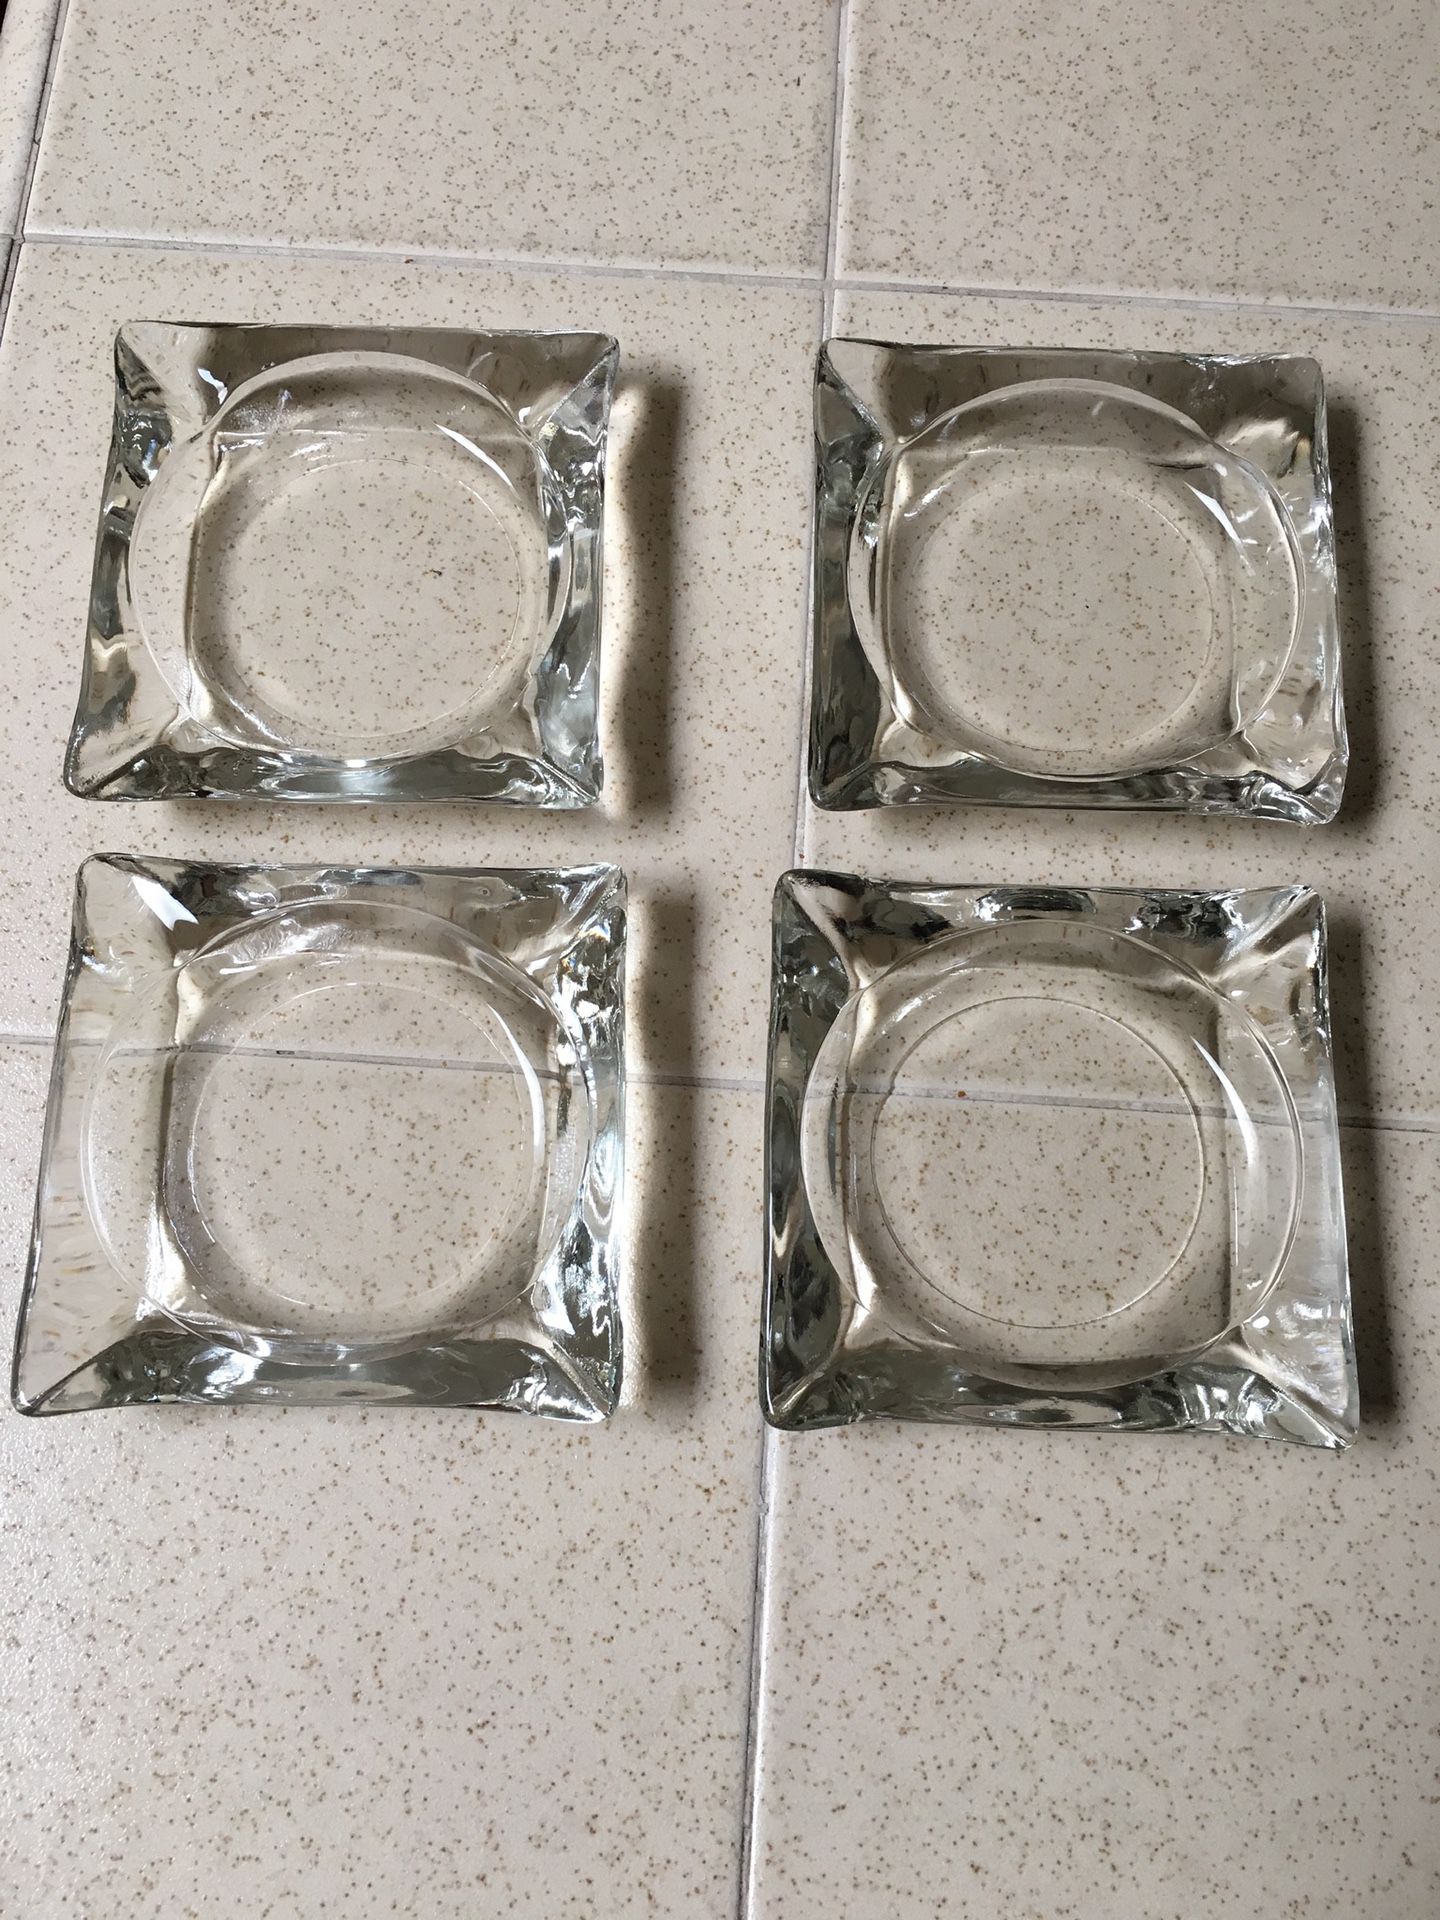 4 old style ashtrays from the 70’s $4